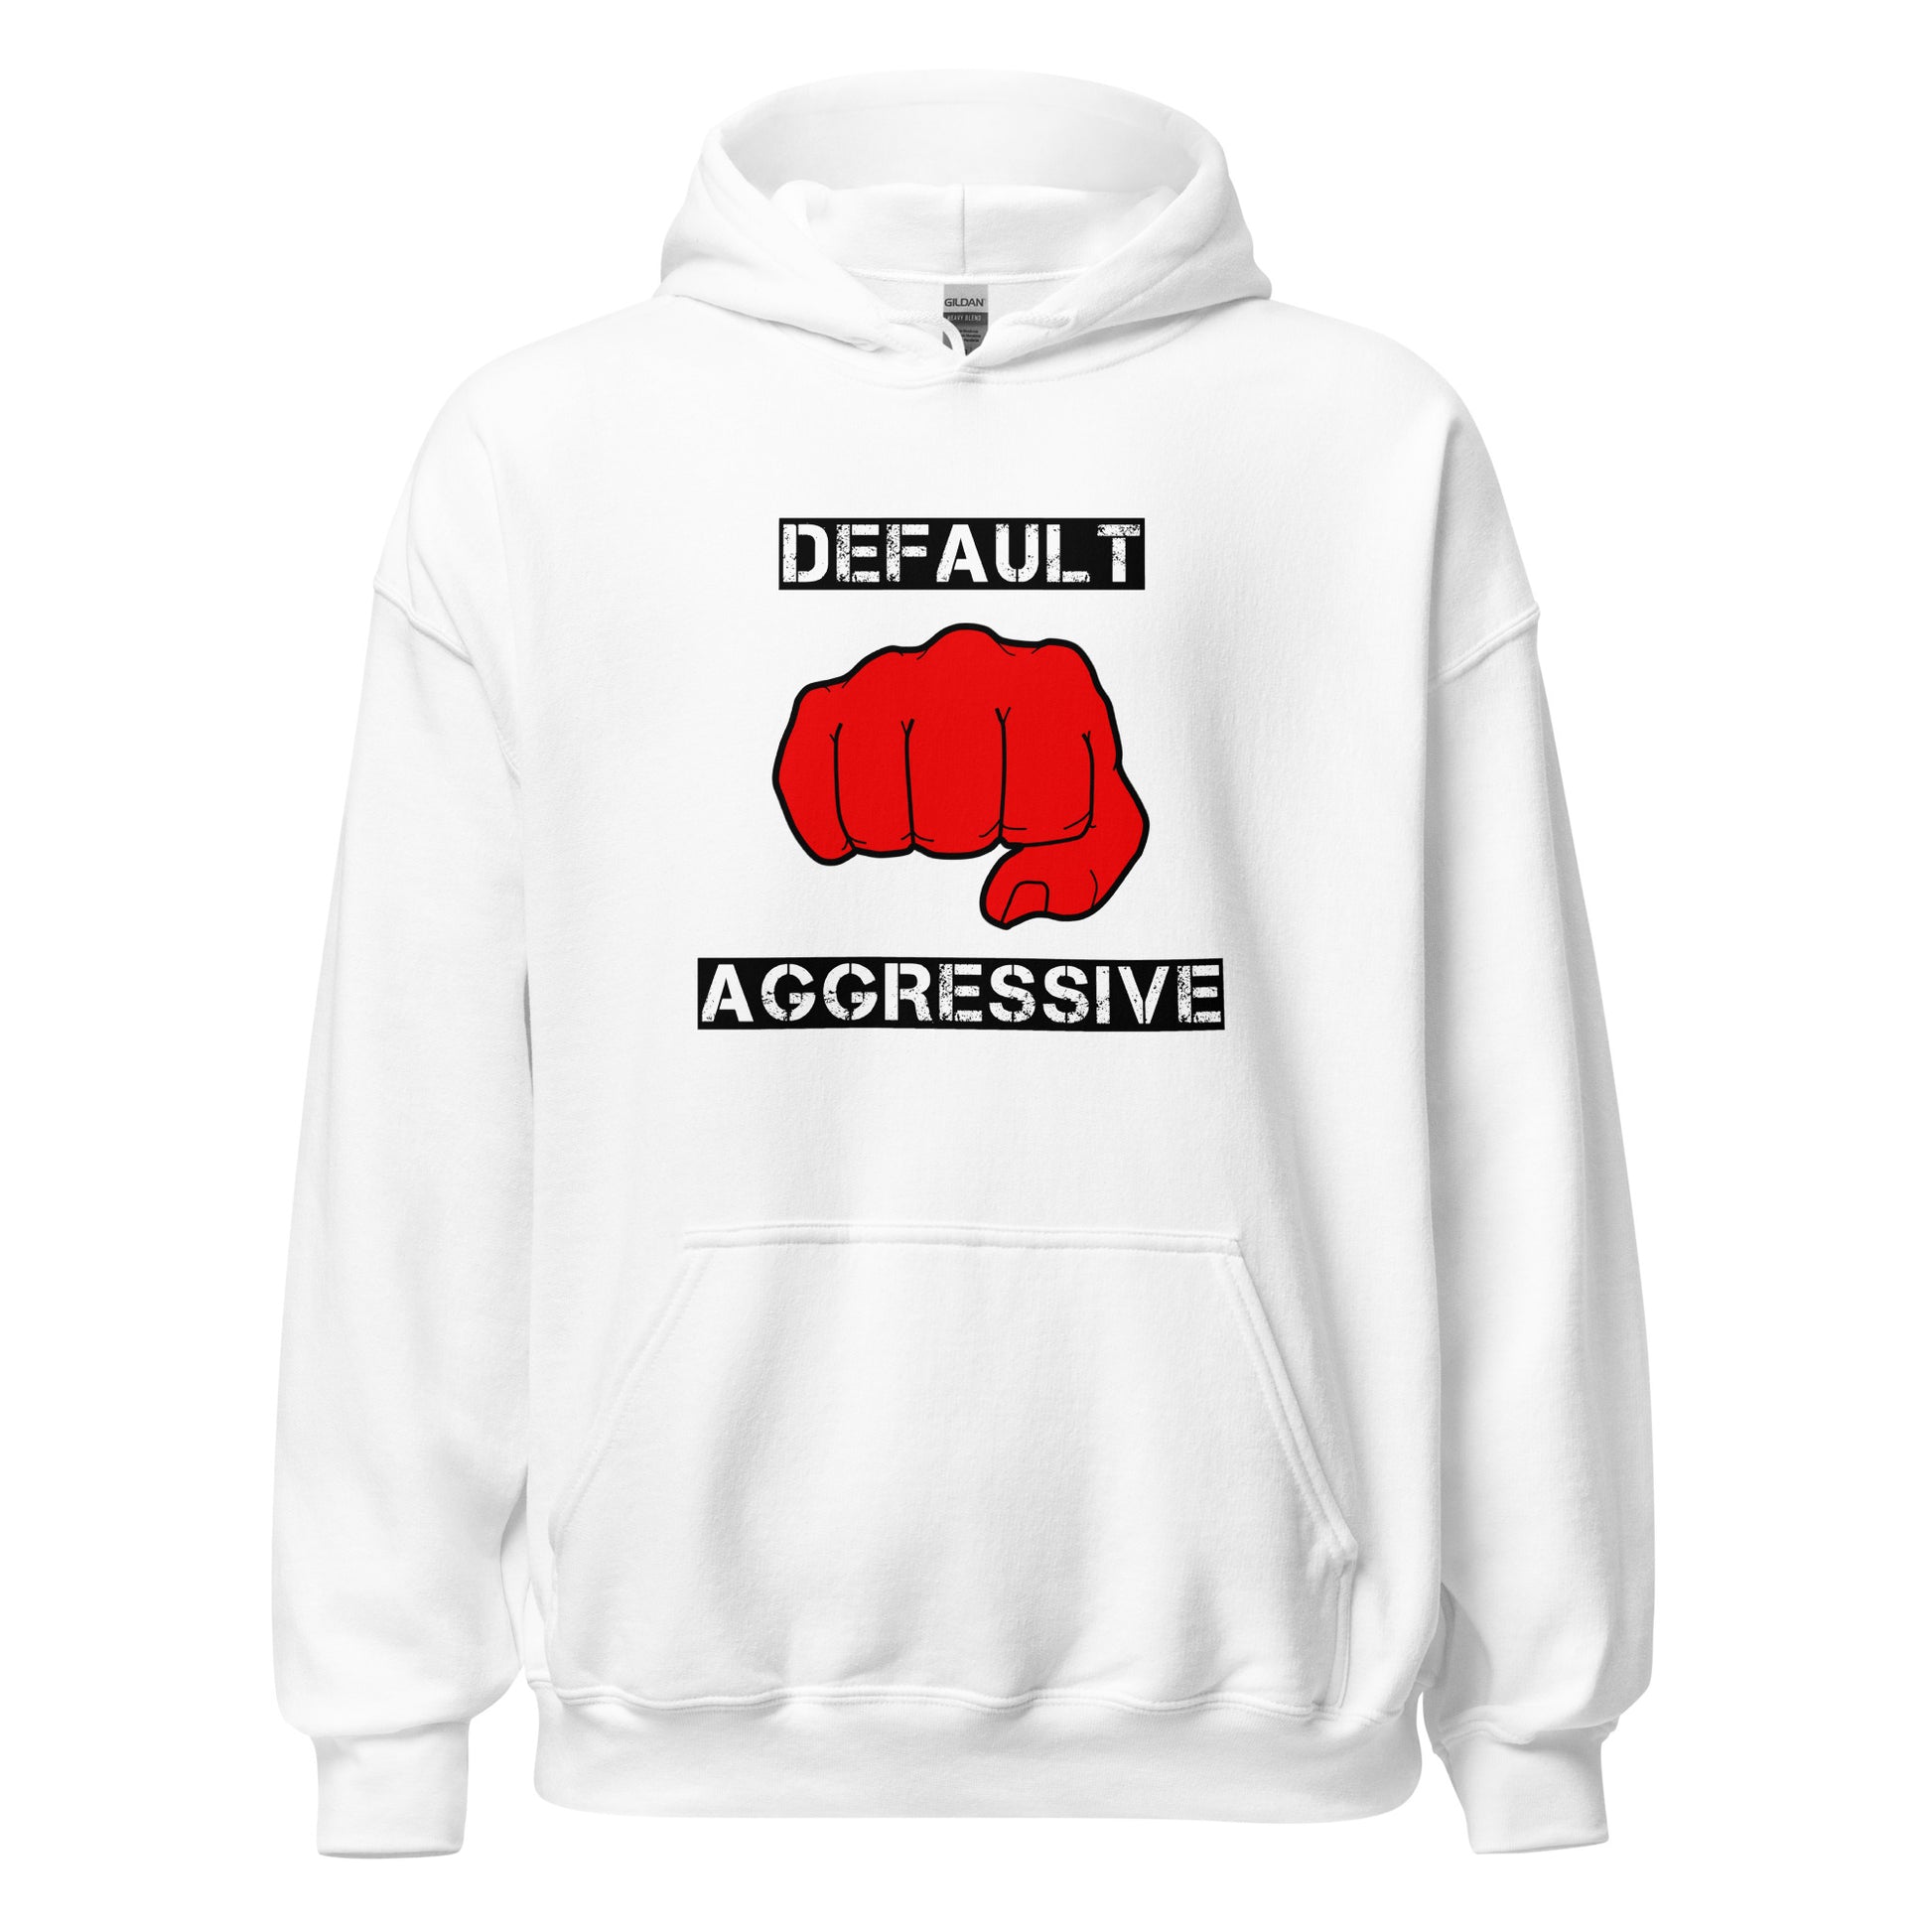 Default Aggressive Hoodie in White